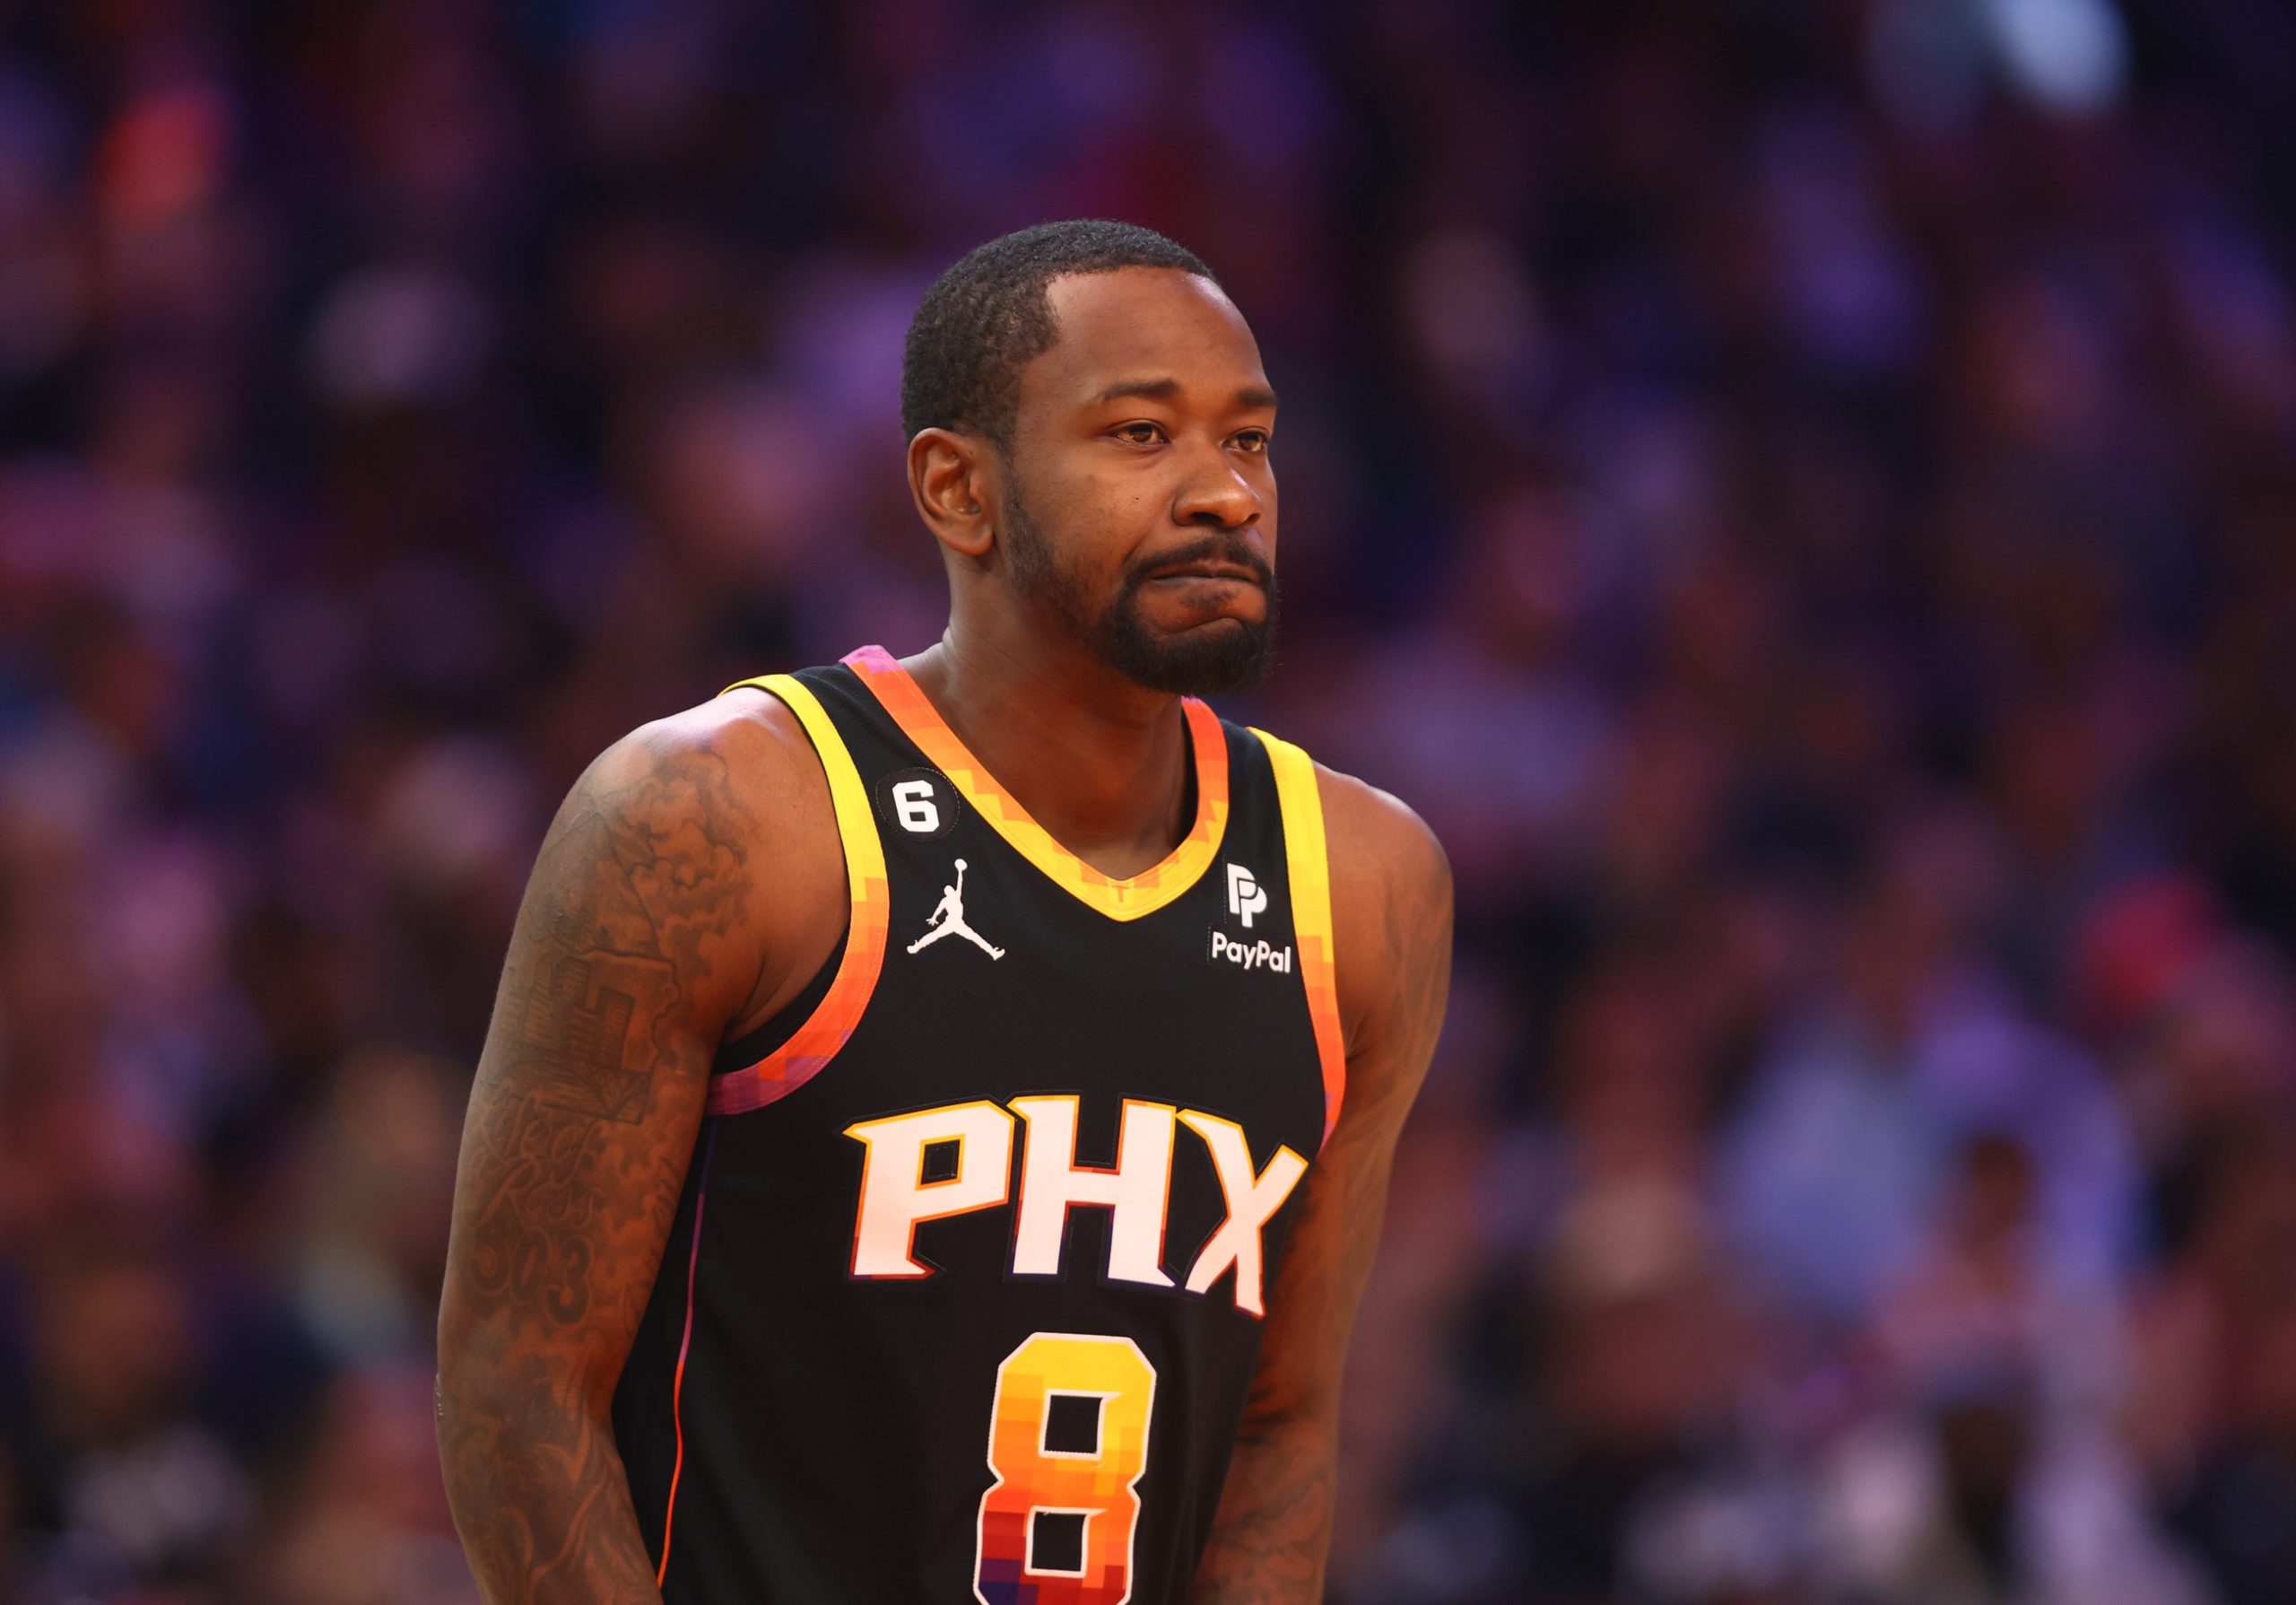 May 7, 2023; Phoenix, Arizona, USA; Phoenix Suns guard Terrence Ross (8) against the Denver Nuggets during game four of the 2023 NBA playoffs at Footprint Center. Mandatory Credit: Mark J. Rebilas-USA TODAY Sports